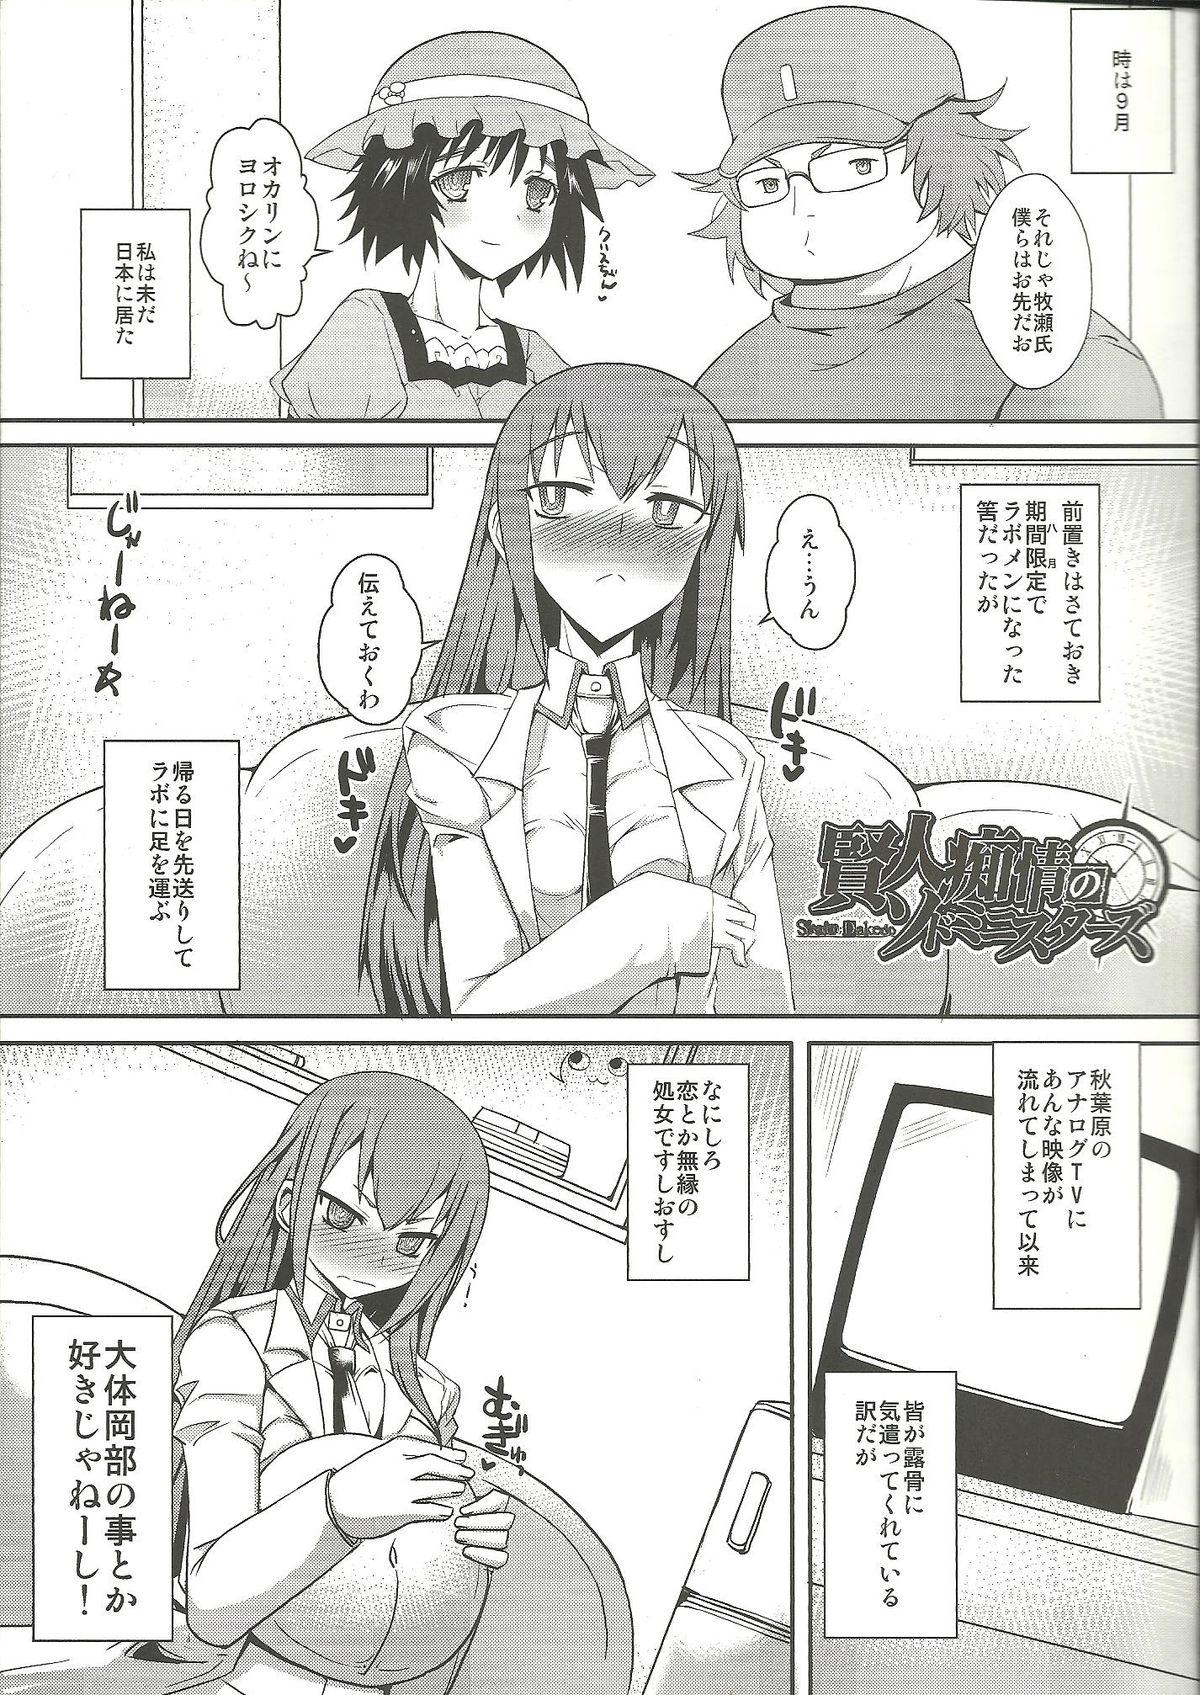 Stepbrother Kenjin Chijou no Sodoministers - Steinsgate Dirty Talk - Page 4